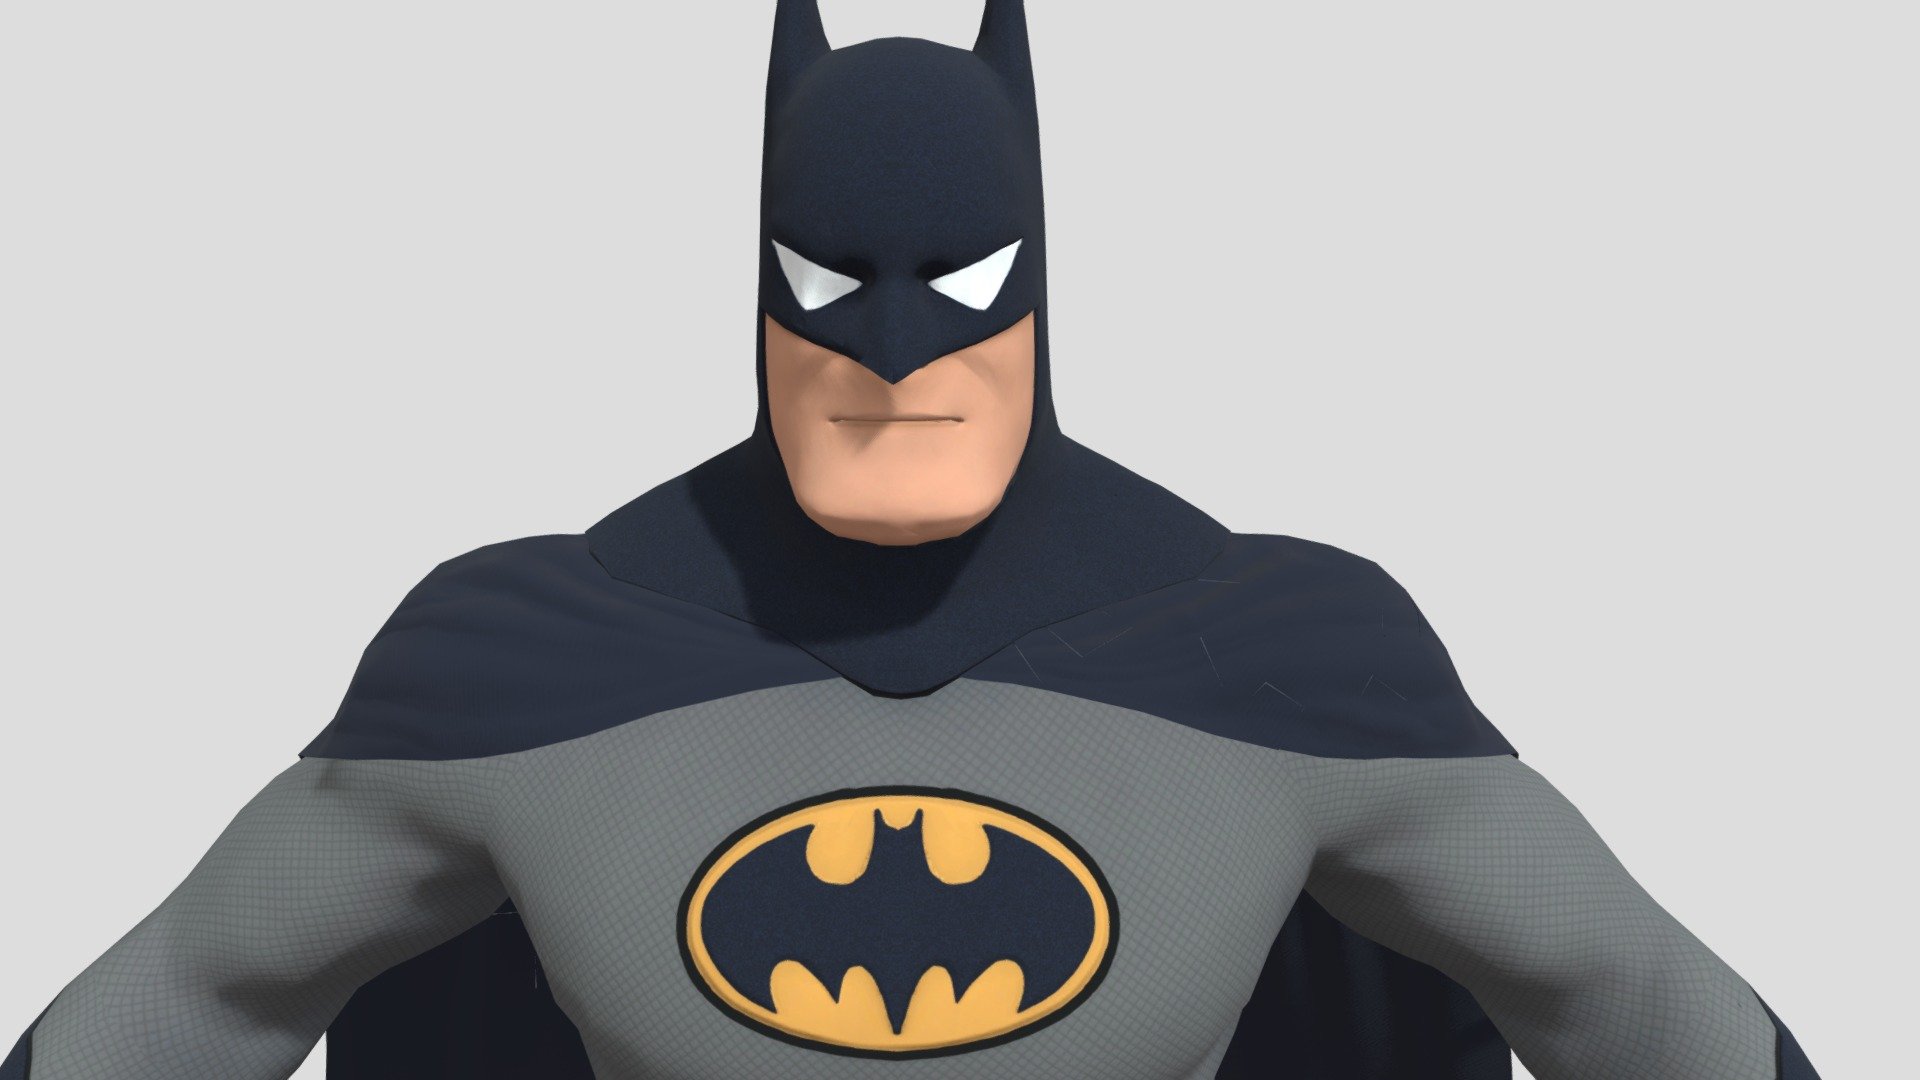 Batman Arkham City: Batman Animated 3D Model free download for Unity and Unreal Engine!!!!!!!!!!!!!!!!!!

MY CODE CREATOR IN FORTNITE: TEAMEW

FIND ME ON YOUTUBE: E.W. amazing games - Batman Arkham City: Batman Animated - Download Free 3D model by EWTube0 3d model